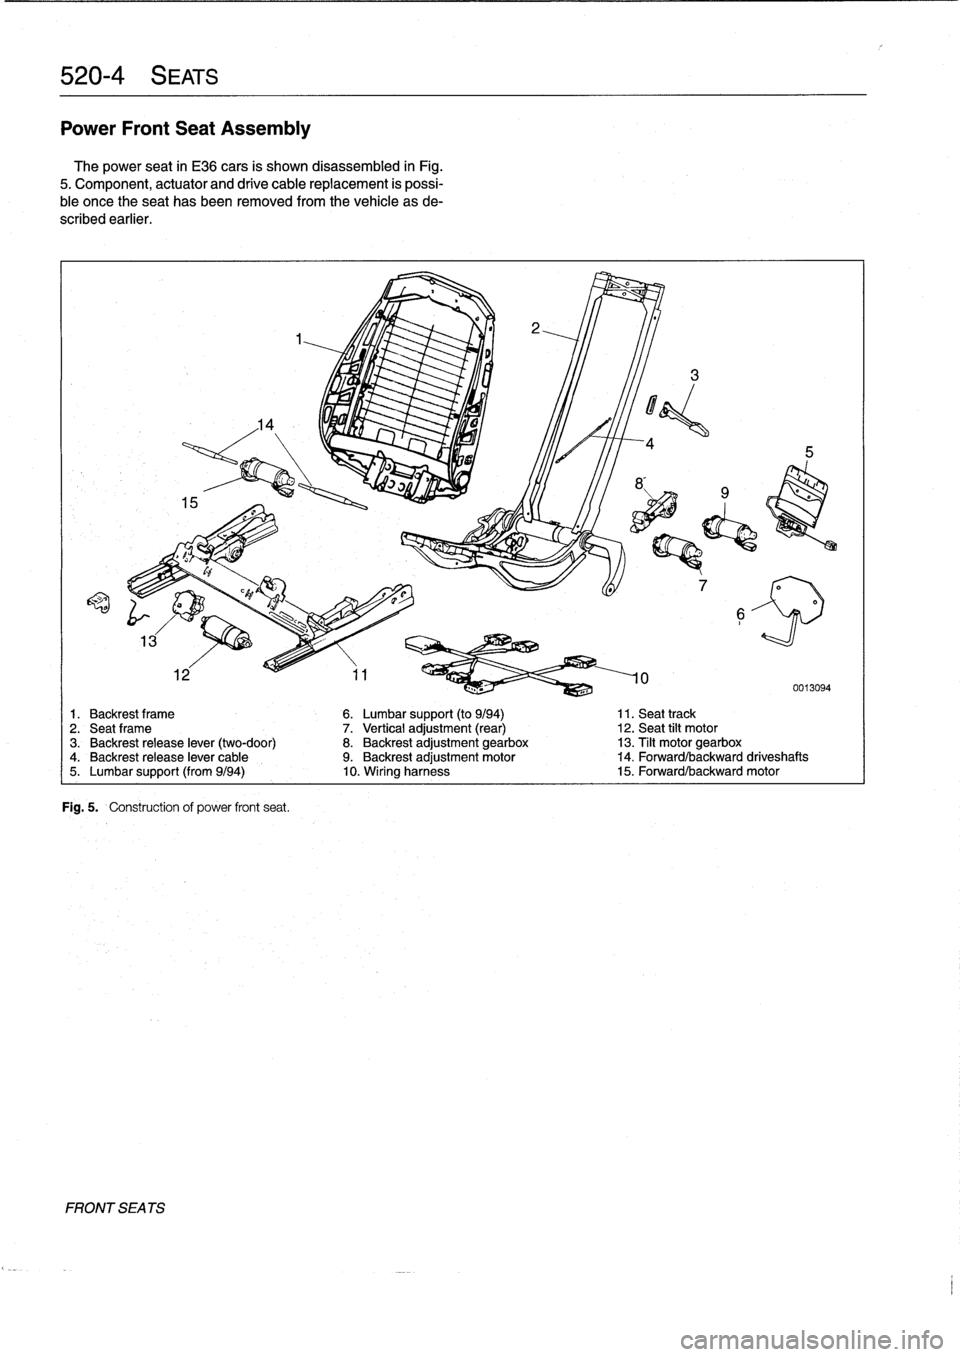 BMW 328i 1995 E36 Workshop Manual 
520-
4
SEATS

Power
Front
Seat
Assembly
The
power
seat
in
E36
cars
is
shown
disassembled
in
Fig
.

5
.
Component,
actuator
and
drive
cable
replacement
is
possi-
ble
once
theseat
has
been
removed
from